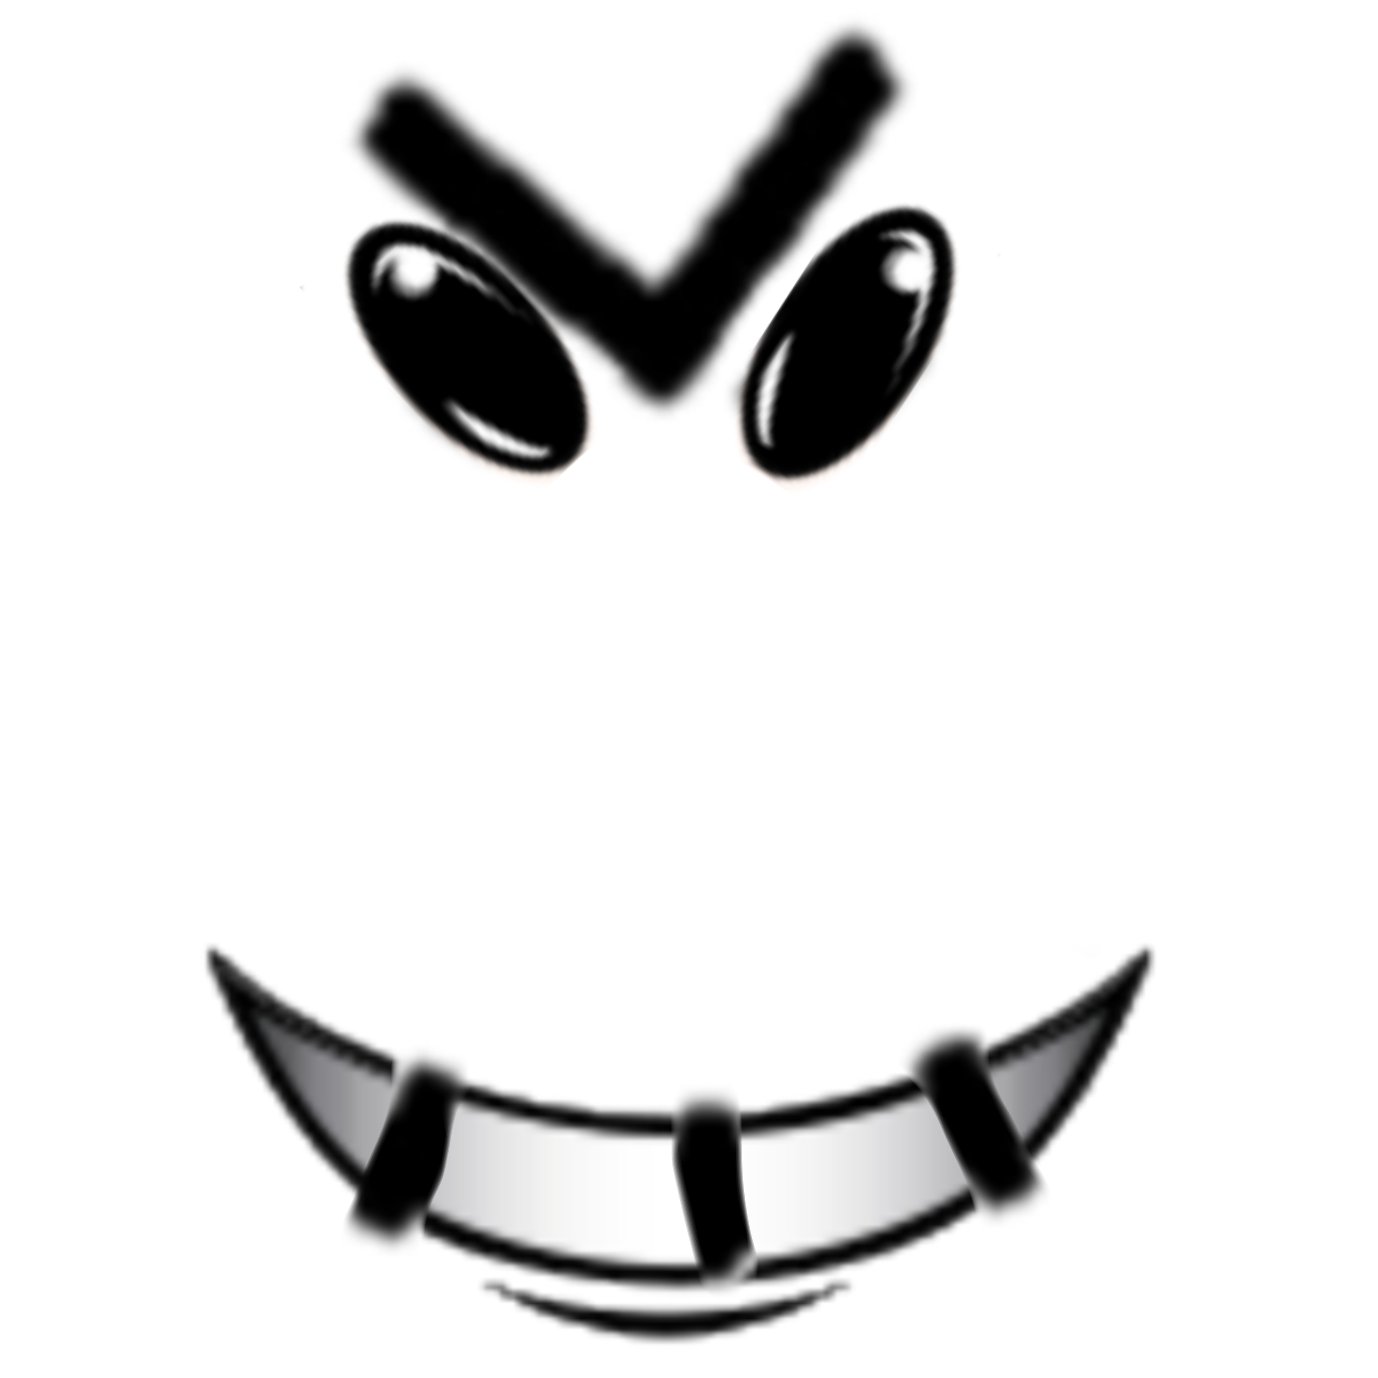 Cursed roblox on X: Stich smile this is cursed wth-? It looks like a evil  boy idk what I just created  / X